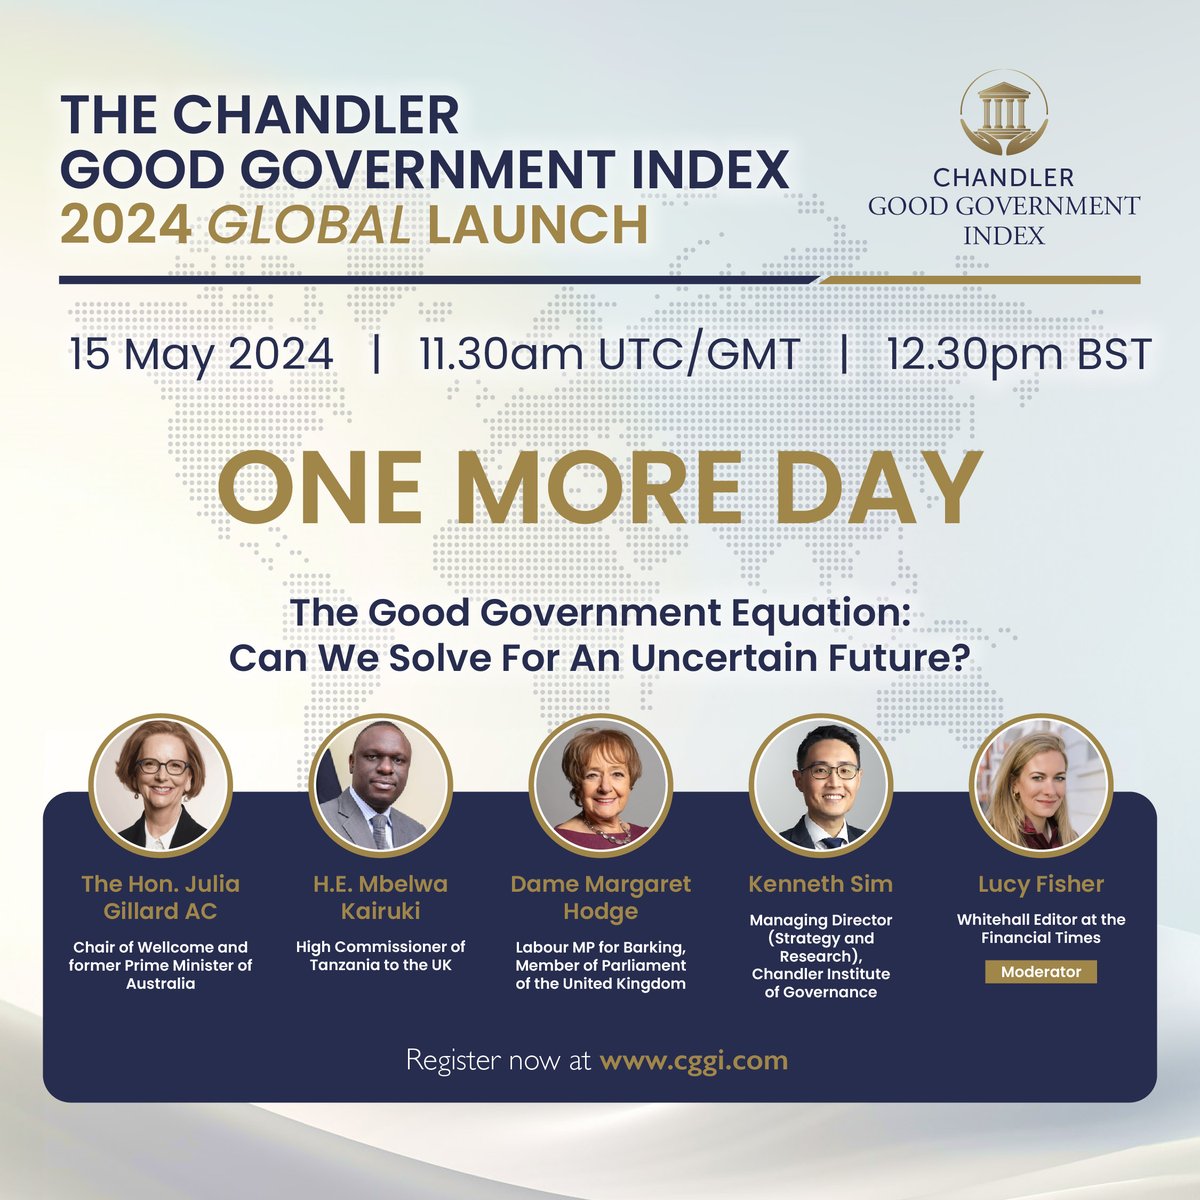 1 more day to the launch of the 2024 Chandler Good Government Index, which ranks and measures government performance around the world. Join us at the event and hear from @JuliaGillard @MbelwaK @margarethodge and @LOS_Fisher Register now at cggi.com #CGGI2024